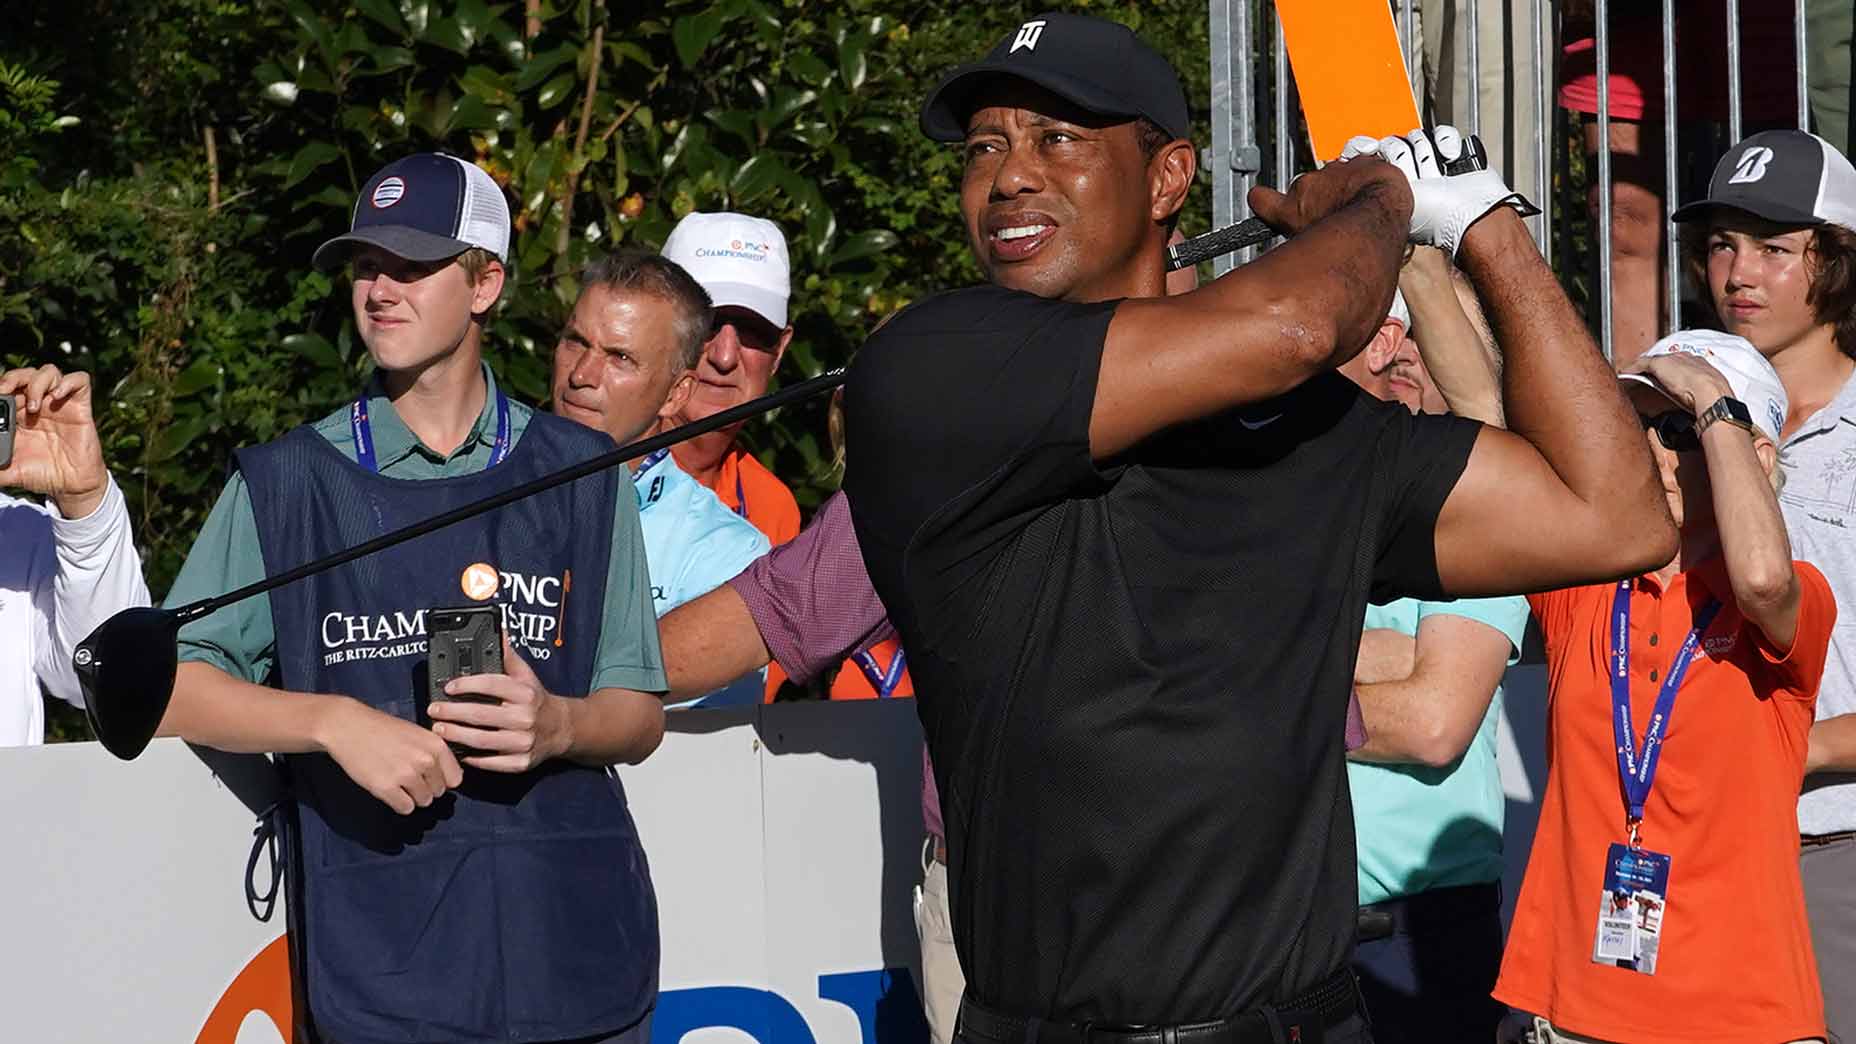 2022 PNC Championship How to watch Tiger Woods this week live on TV, streaming